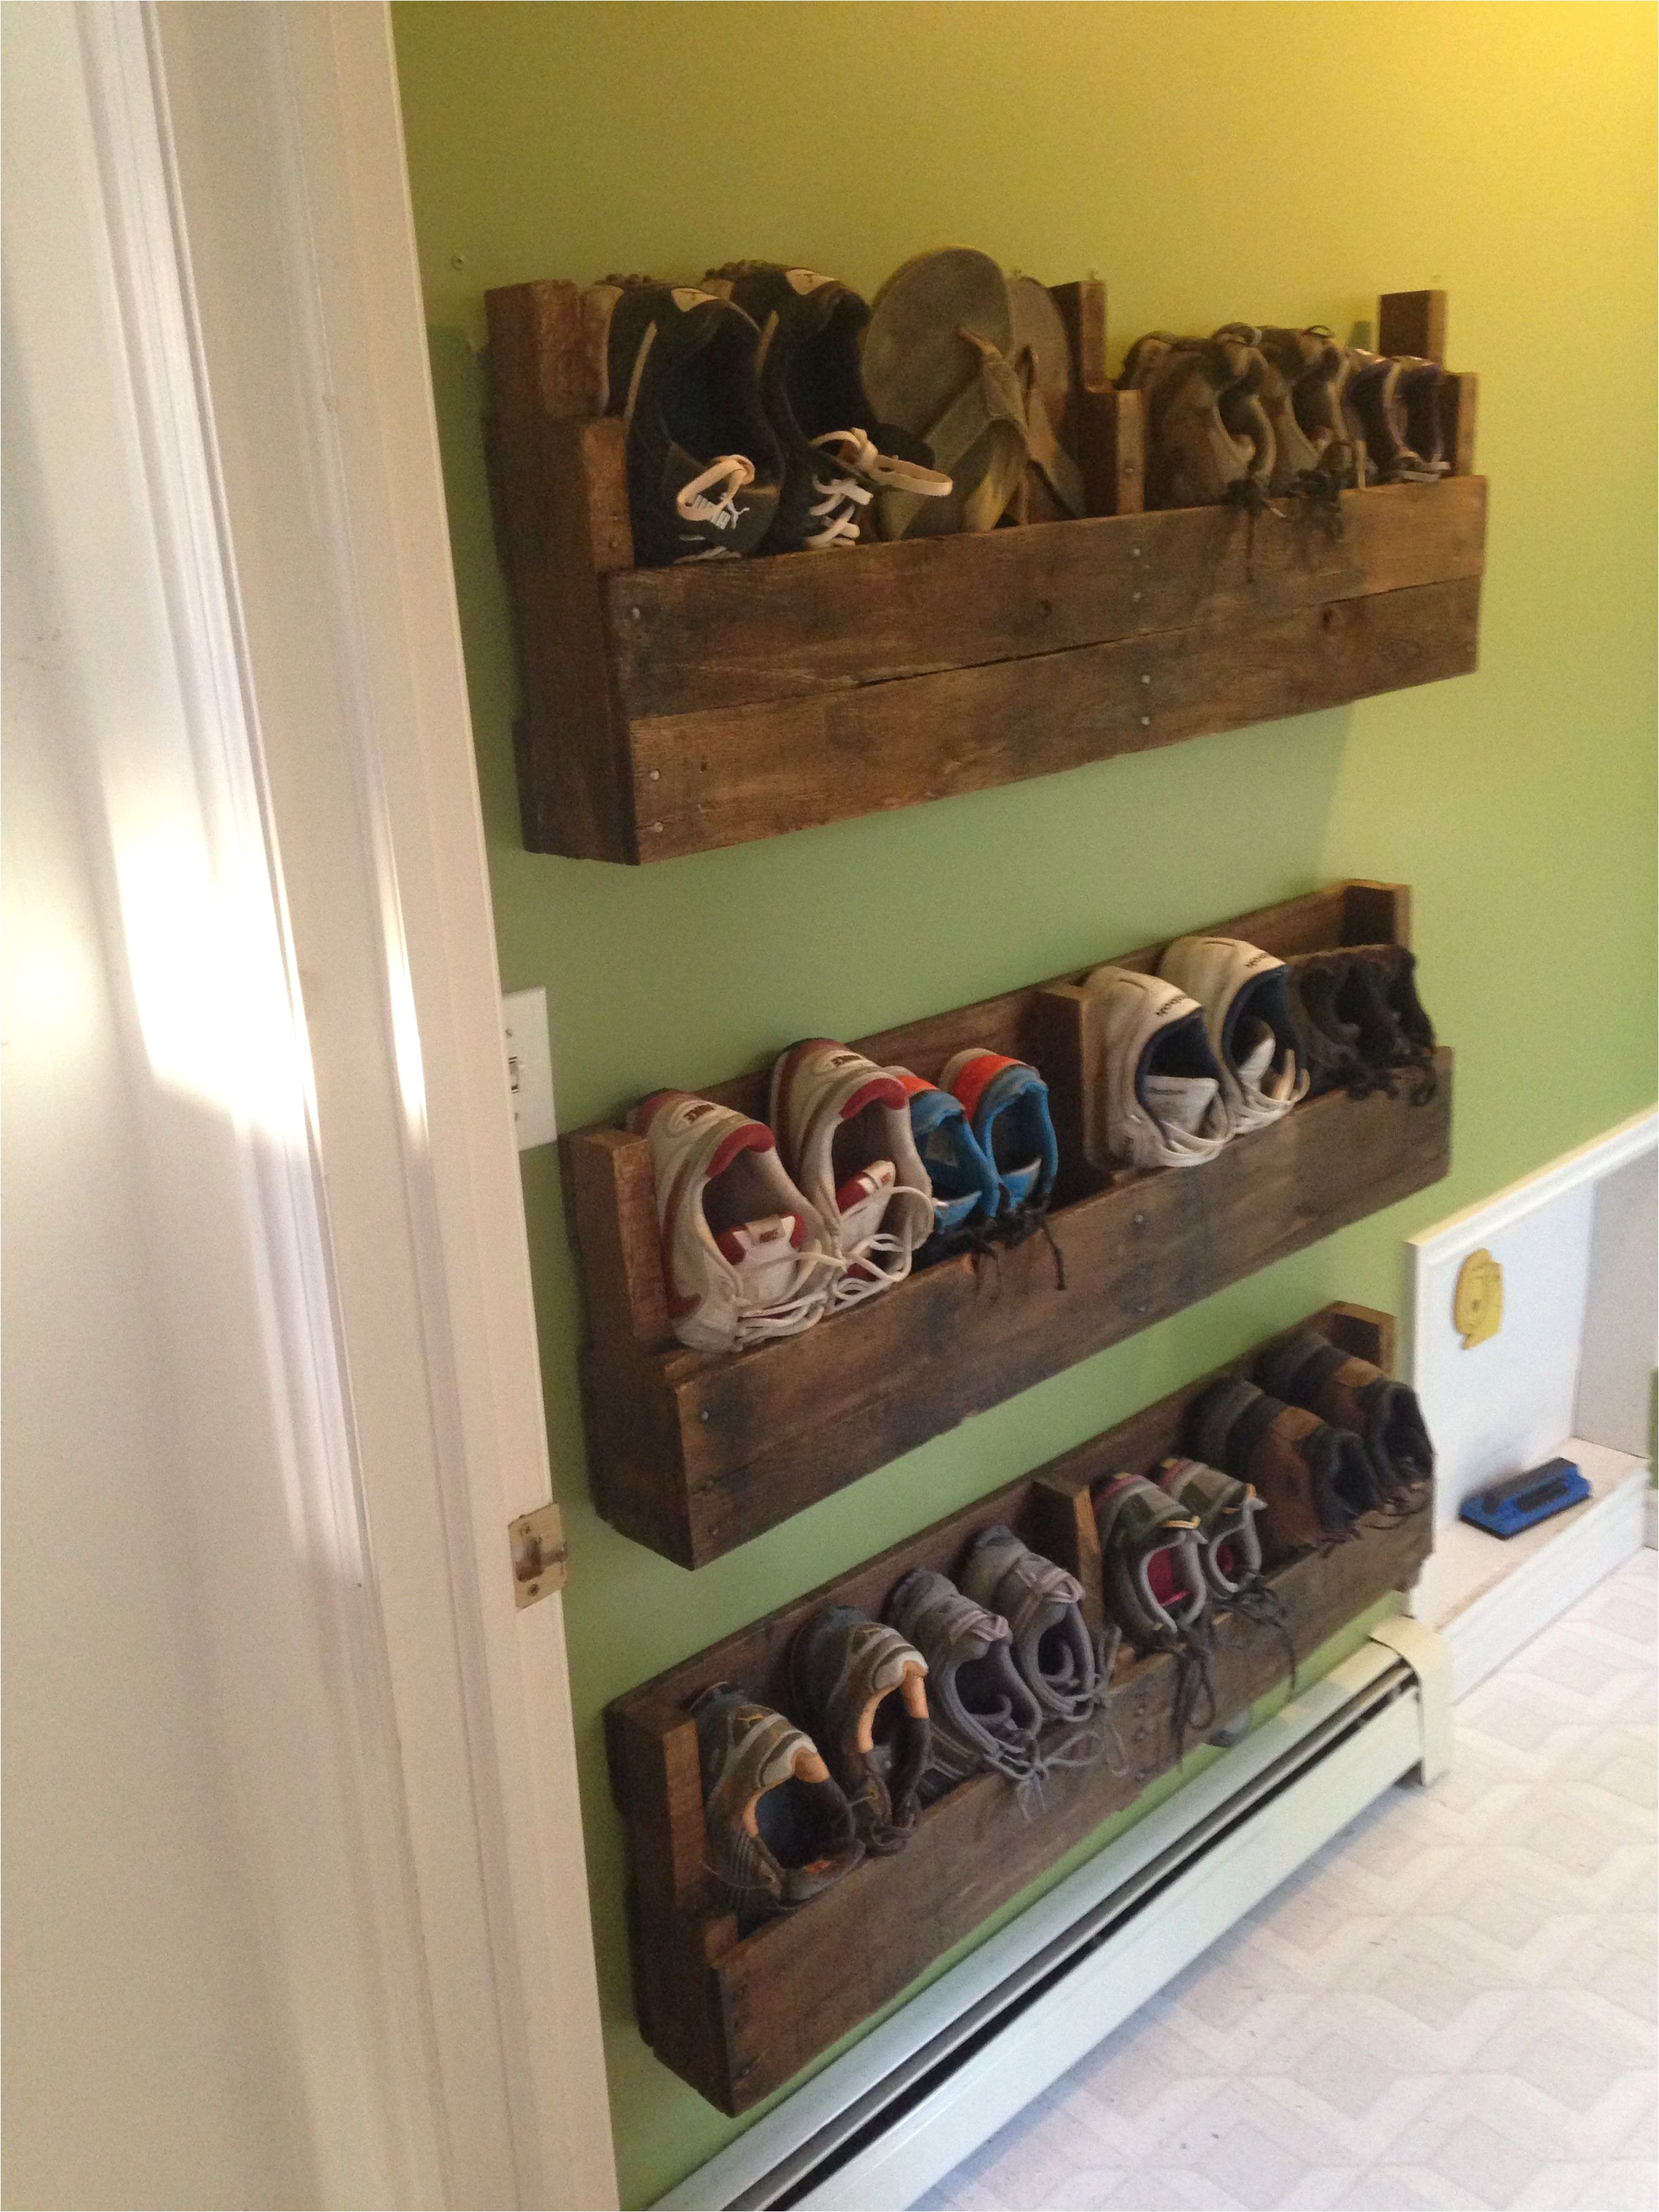 dyi shoe rack made out of pallets project i have been trying to finish to clean up my mud room